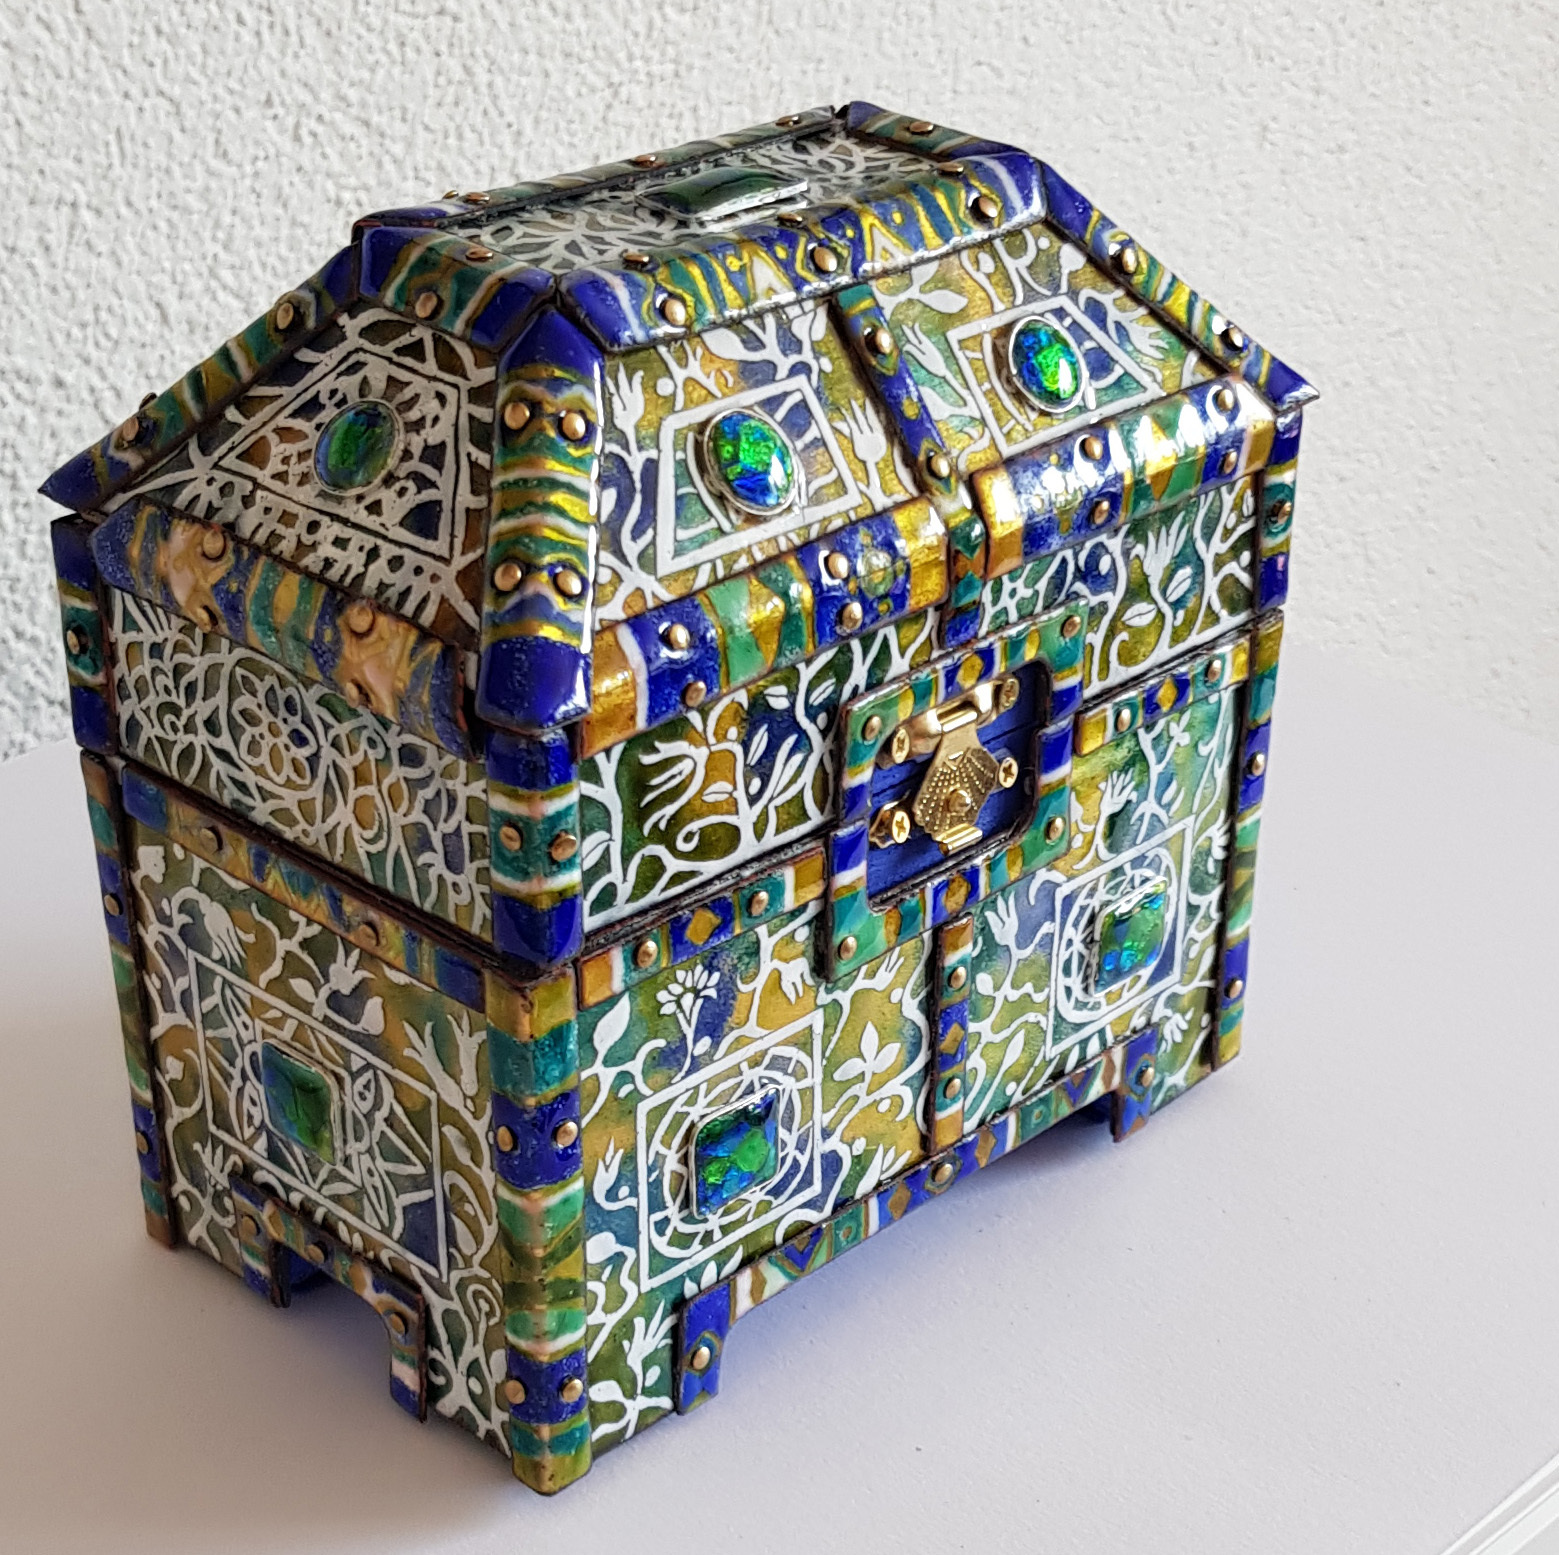 Precious Box - Enamel covered box inspired by  an ivory carved  box from the 11th century .